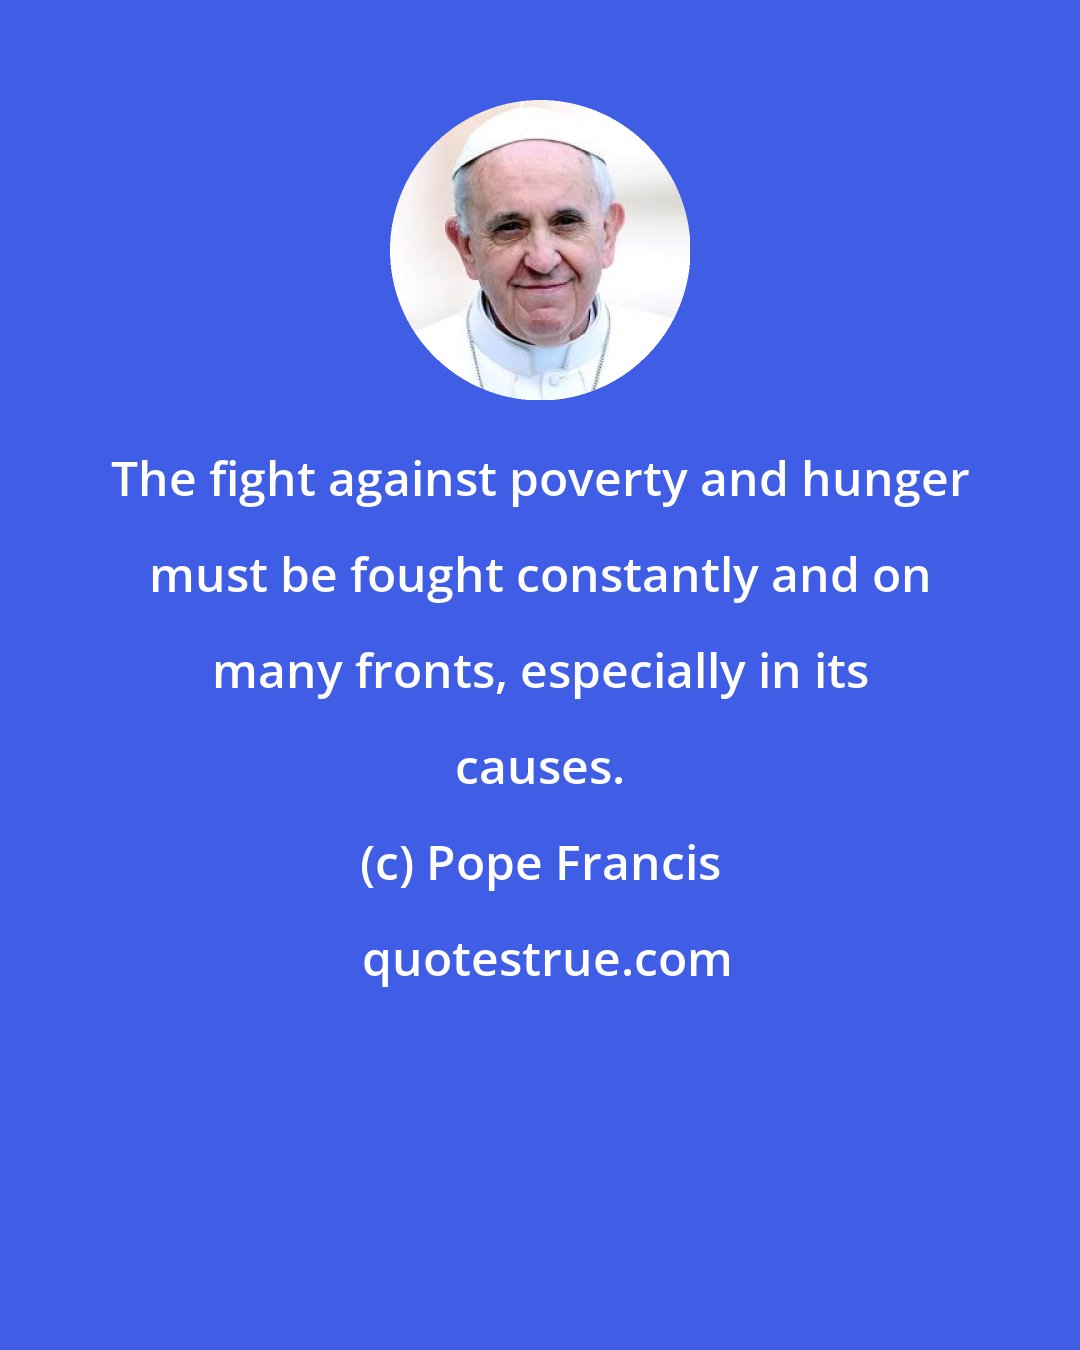 Pope Francis: The fight against poverty and hunger must be fought constantly and on many fronts, especially in its causes.